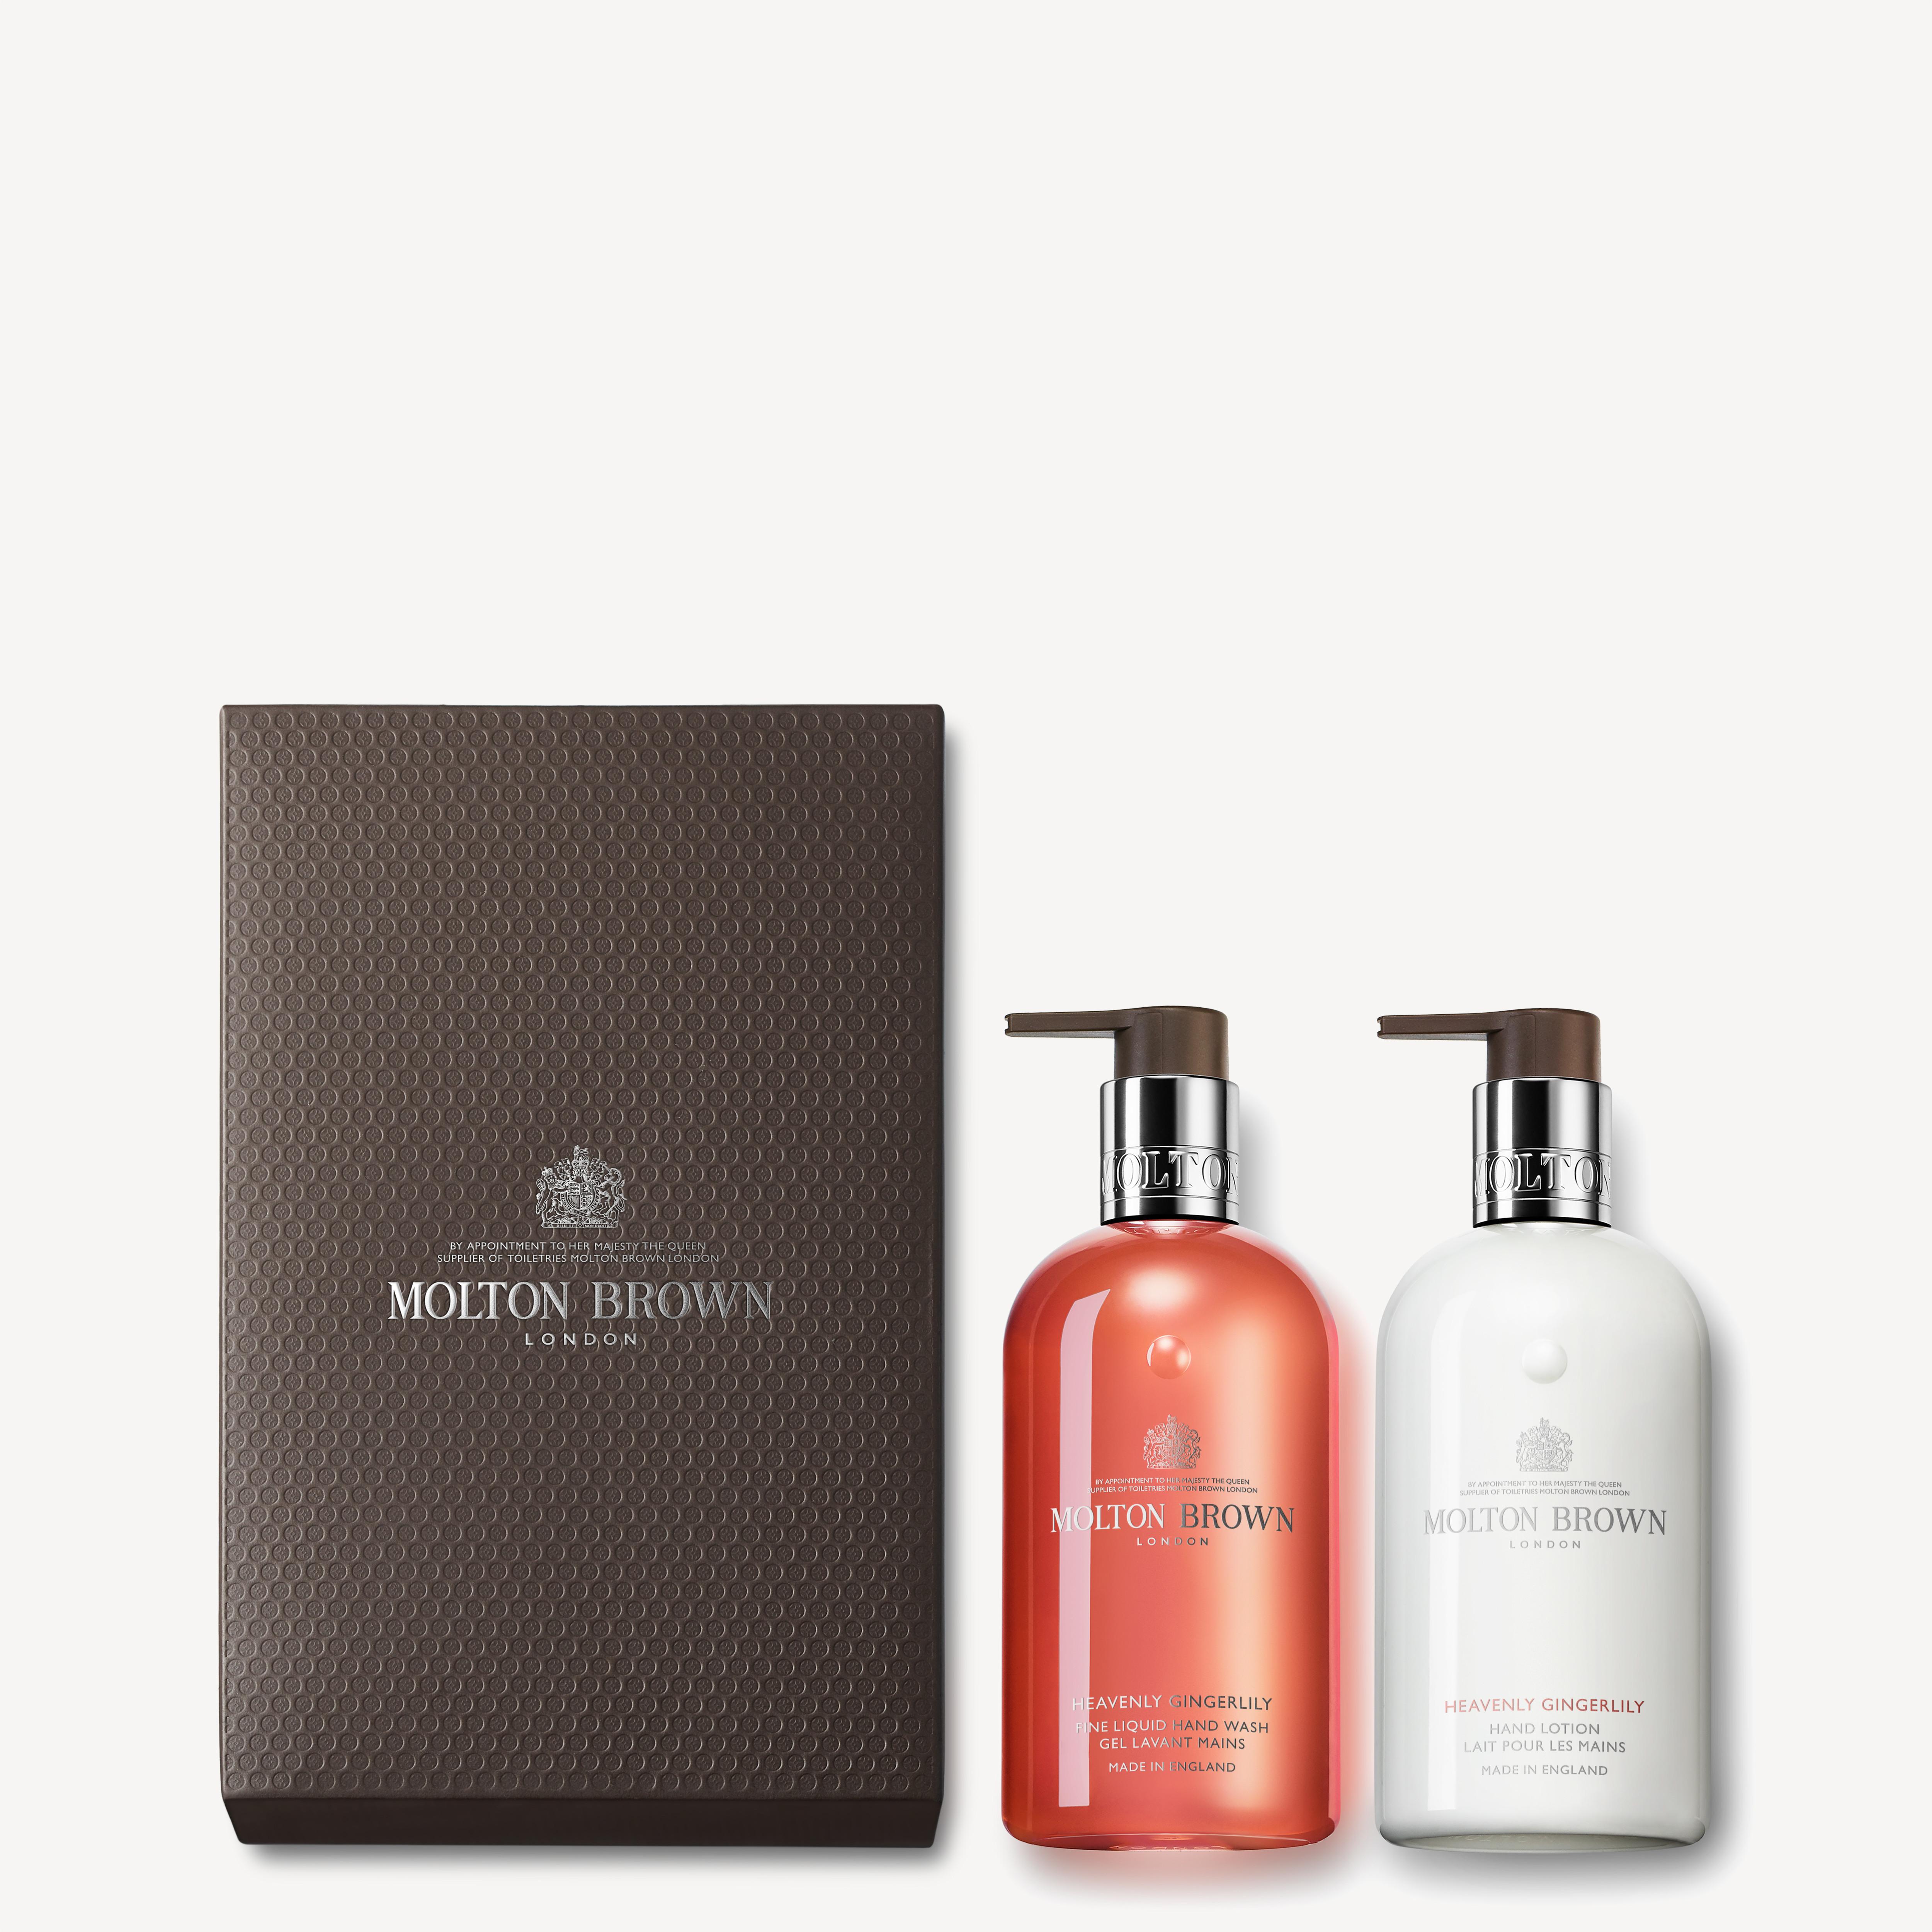 Molton Brown Heavenly Gingerlily Hand Wash & Lotion Set